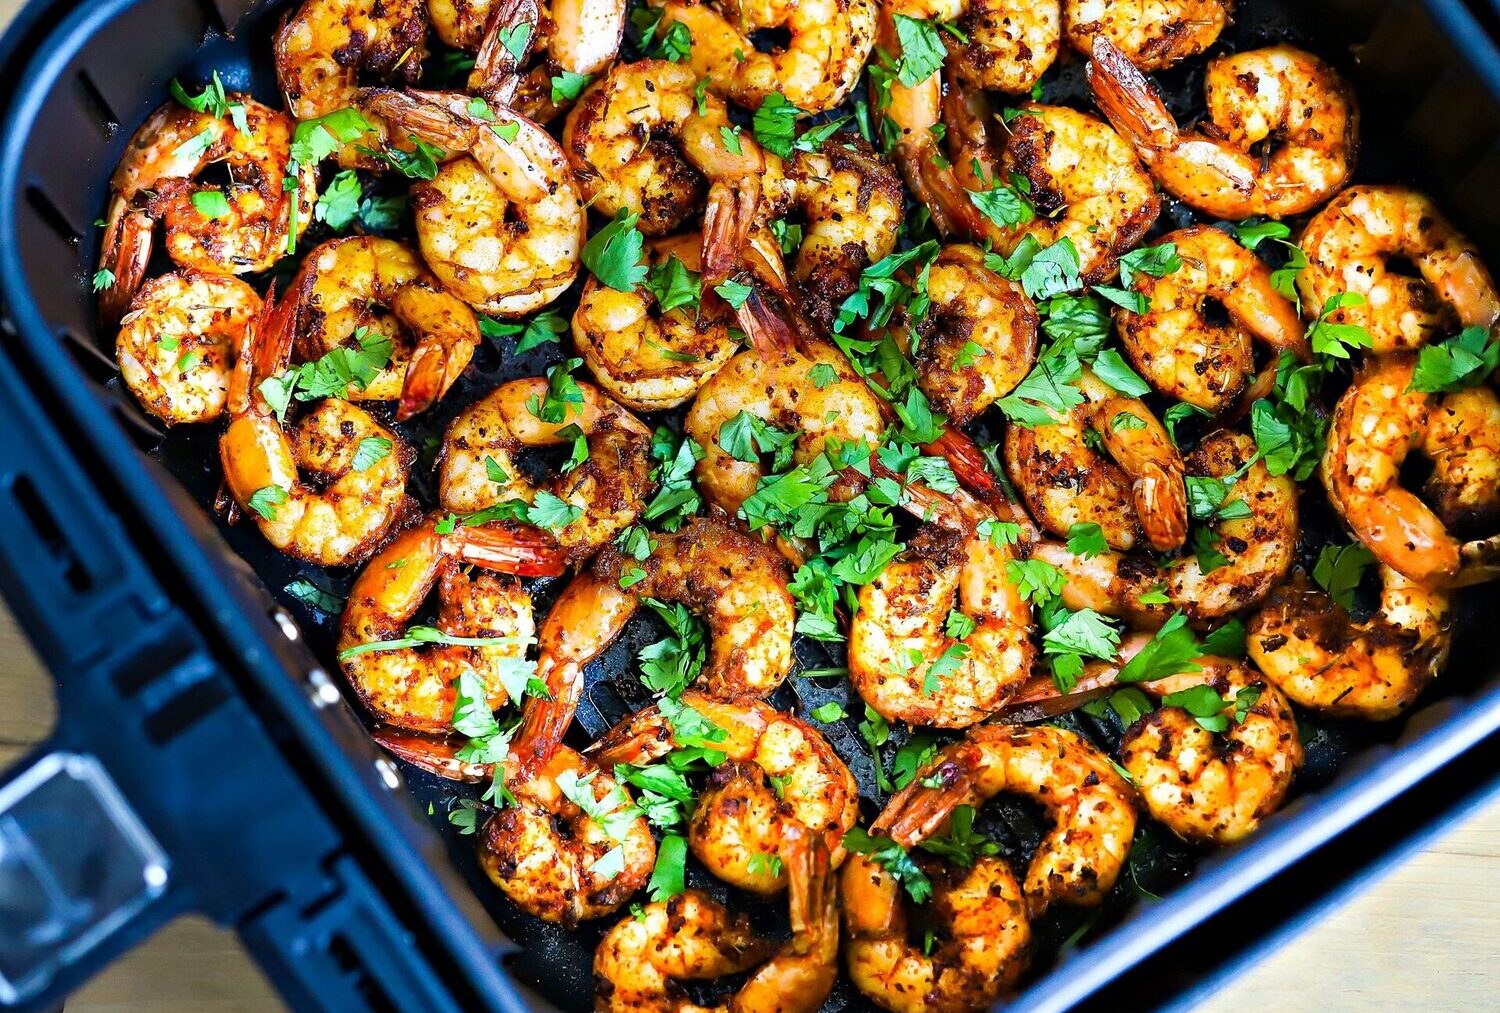 How Long To Cook Shrimp In The Air Fryer